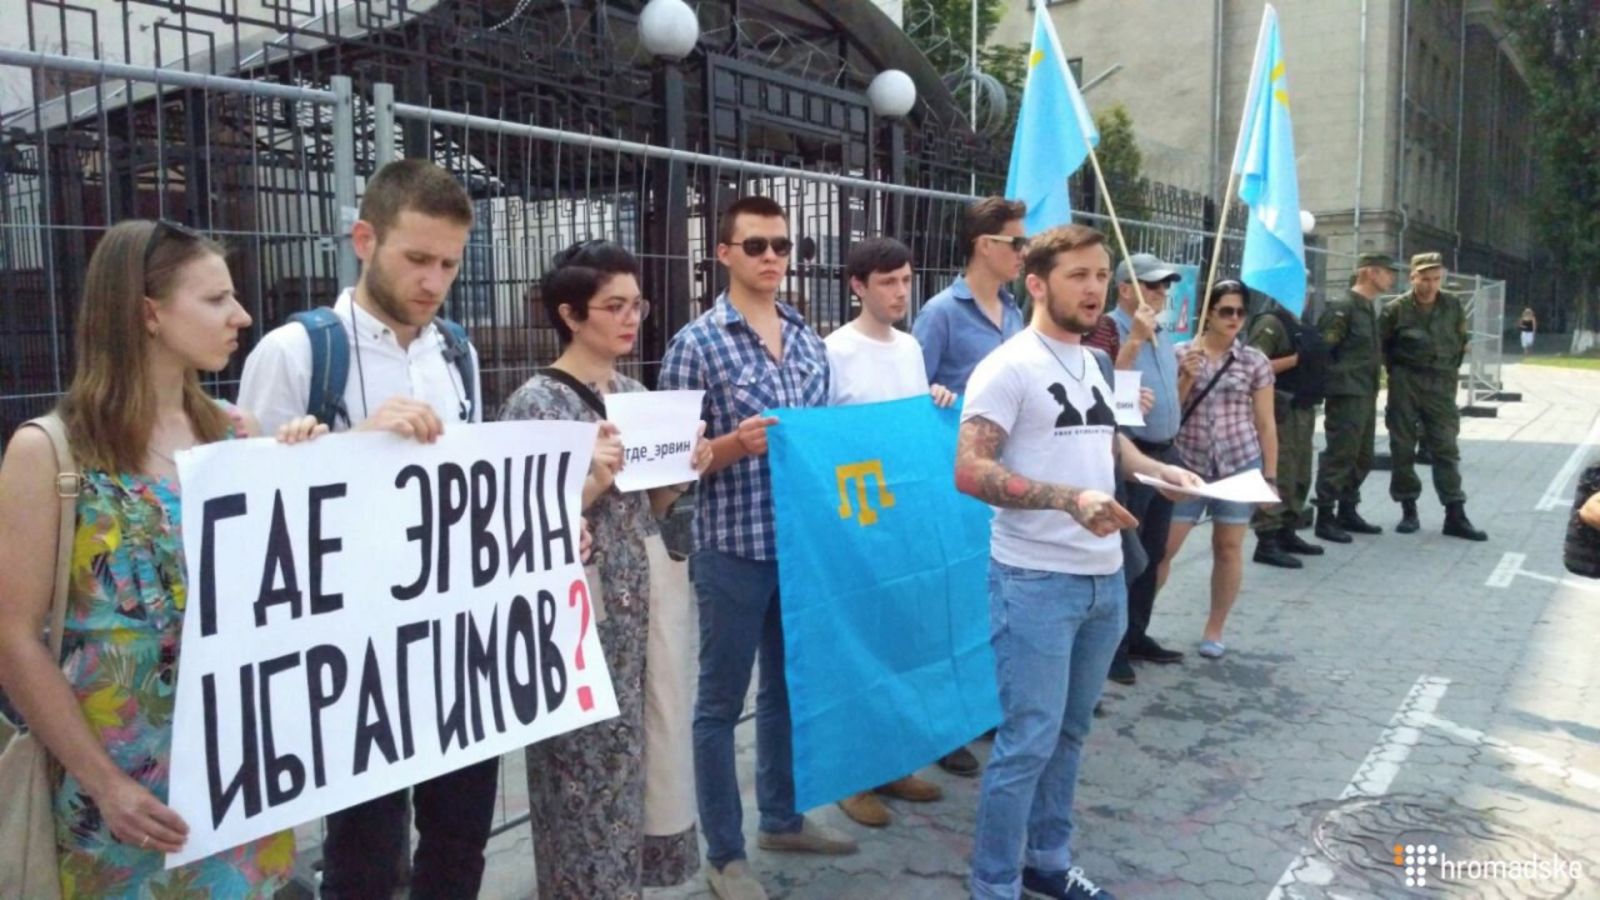 Former hostage of Crimean FSB Hennadiy Afanasyev and other activists ask Russia Where Is Ervin Ibragimov in front of her embassy in Kyiv. Photo: Hromadske